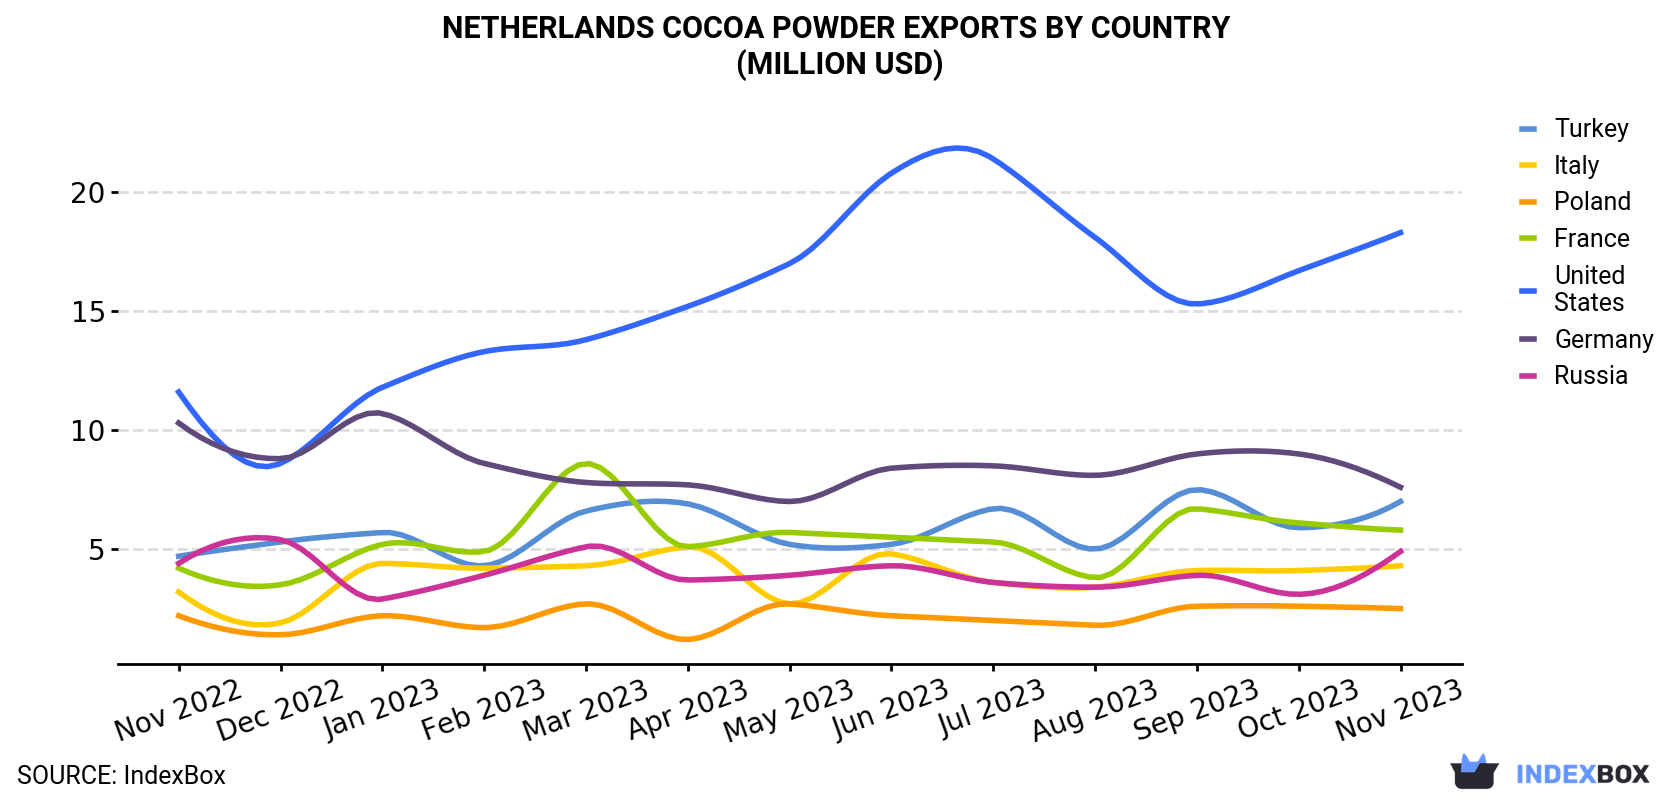 Netherlands Cocoa Powder Exports By Country (Million USD)